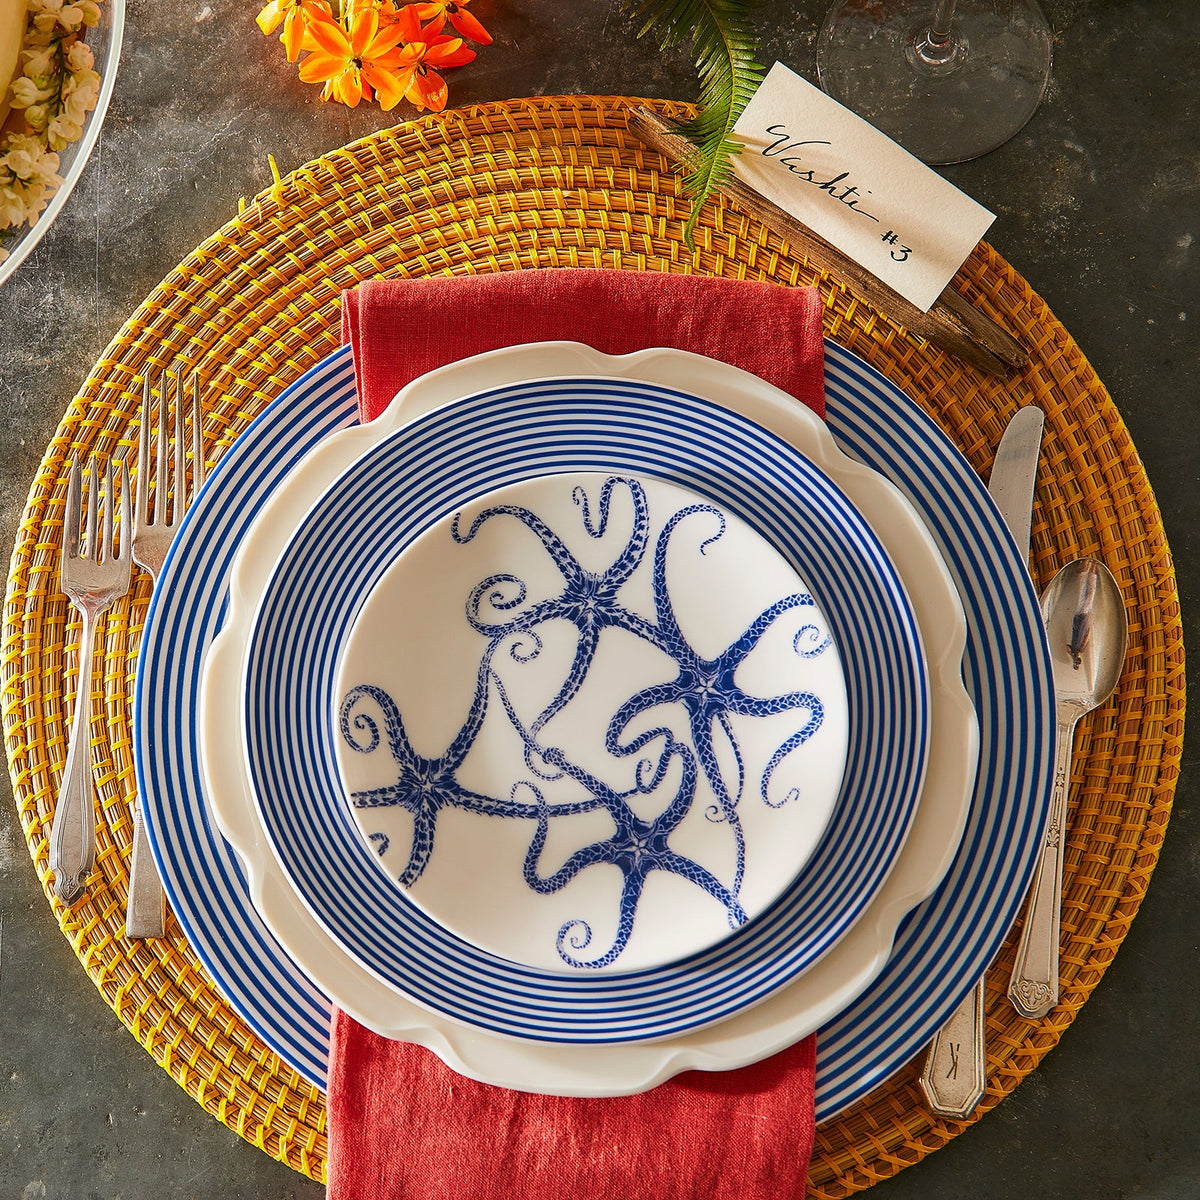 A Grace White Buffet Plate by Caskata Artisanal Home, with polished curves and a blue and white design, perfect for adding grace to any table.